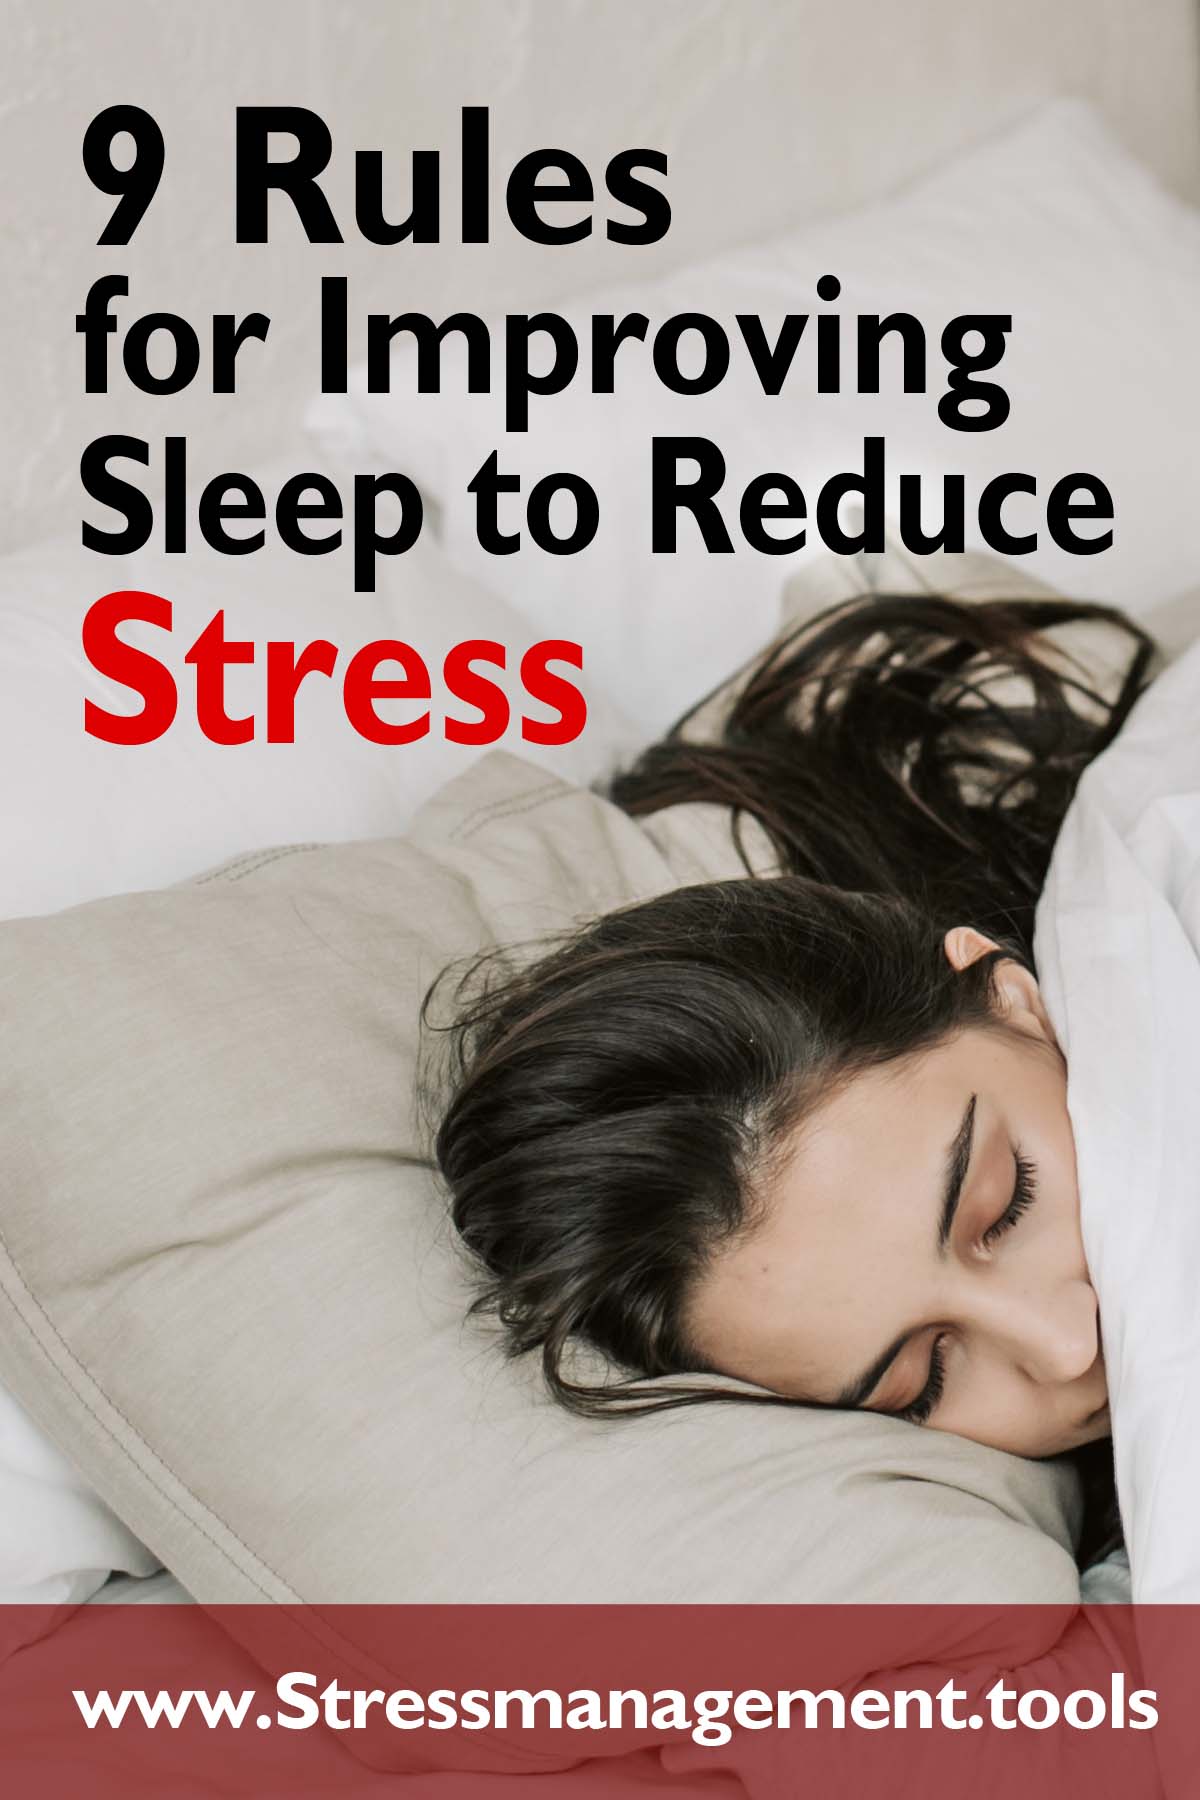 9 Rules for Improving Sleep to Reduce Stress